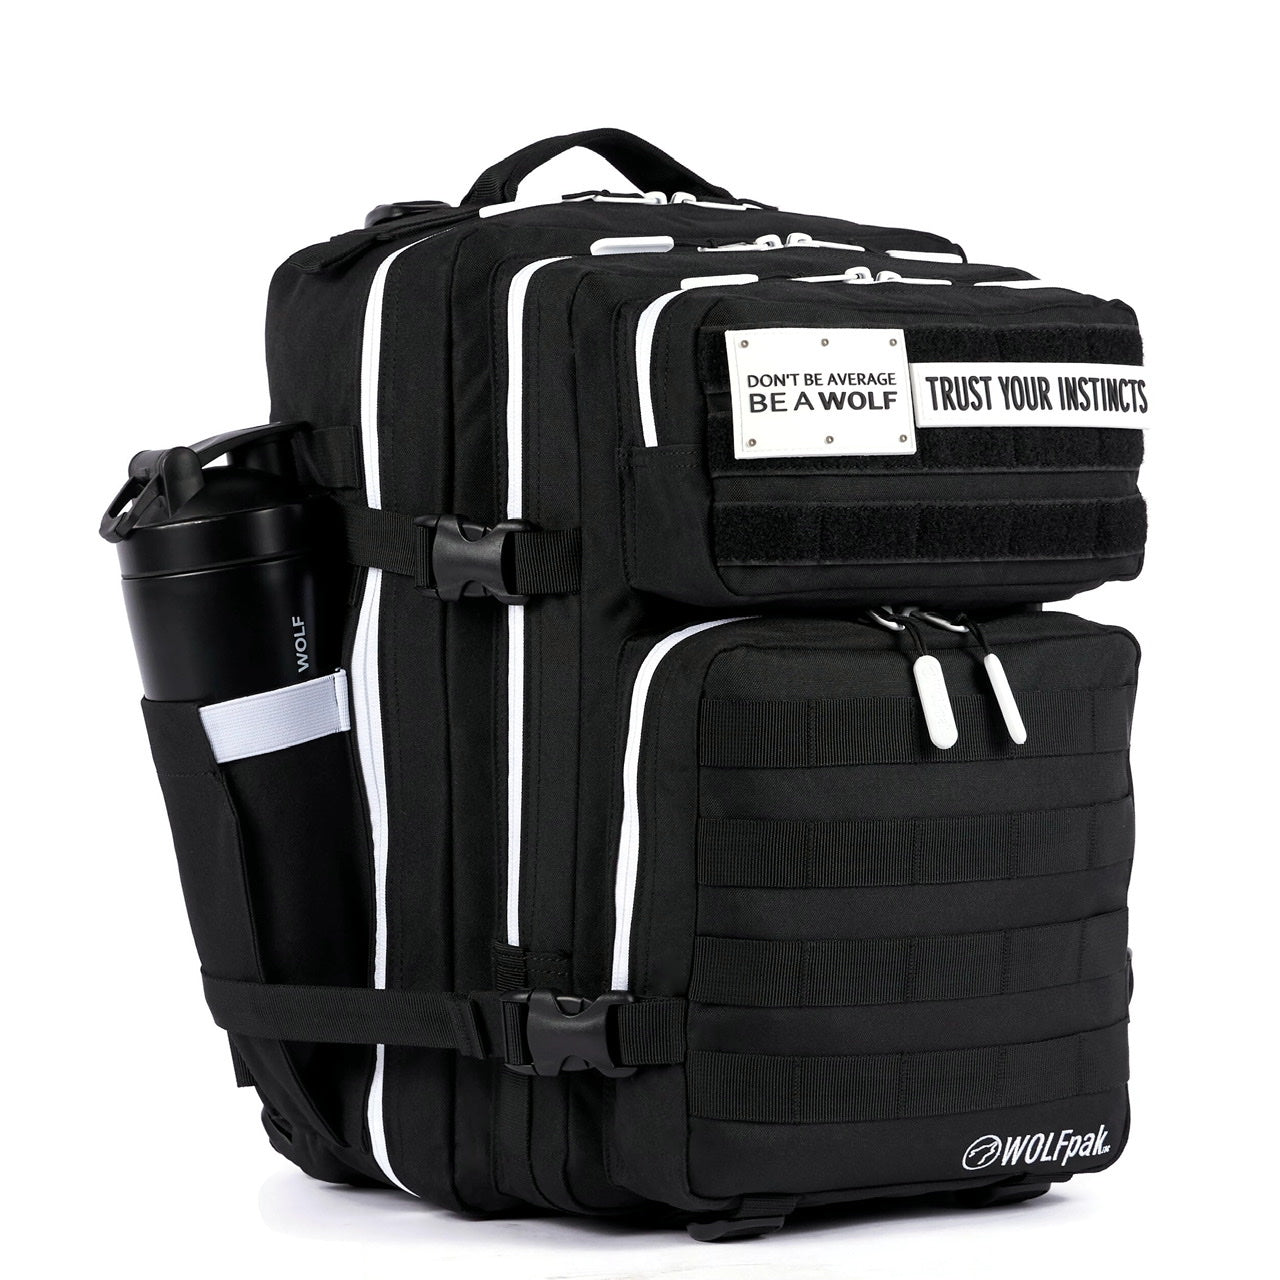 35L Backpack Alpha Black White Accents